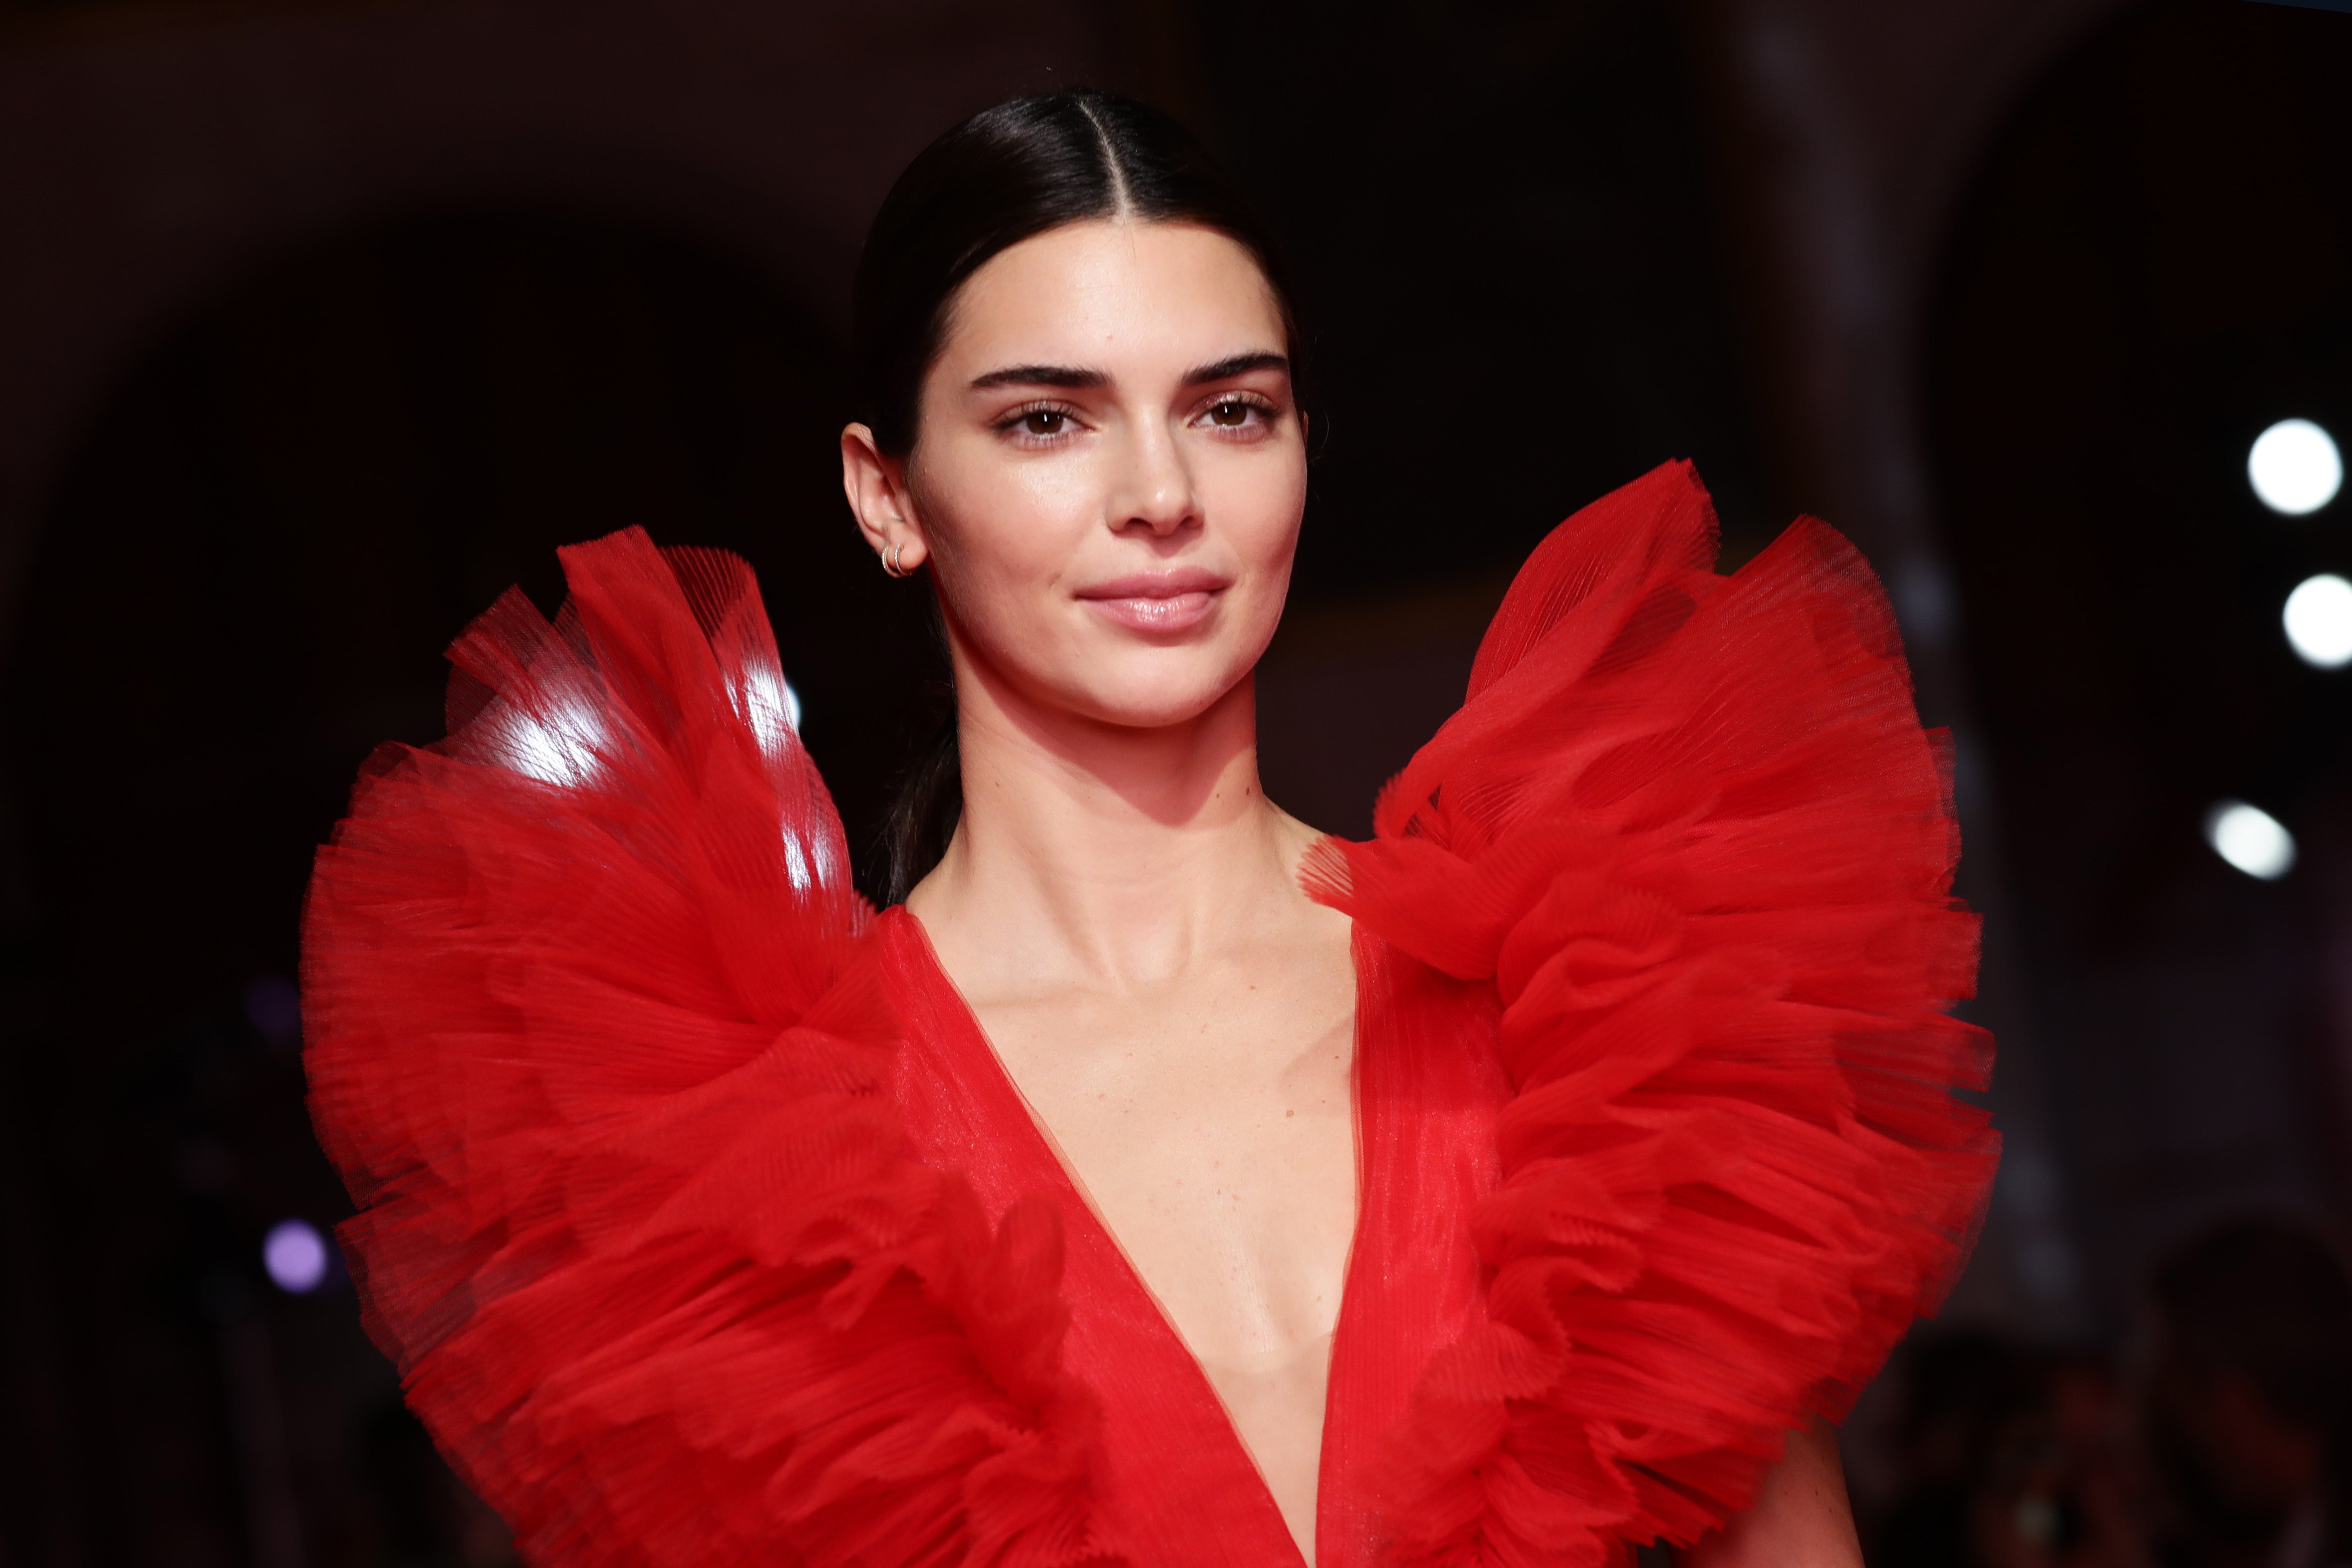 File image: Kendall Jenner walks the runway during the Giambattista Valli Loves H&M show 2019